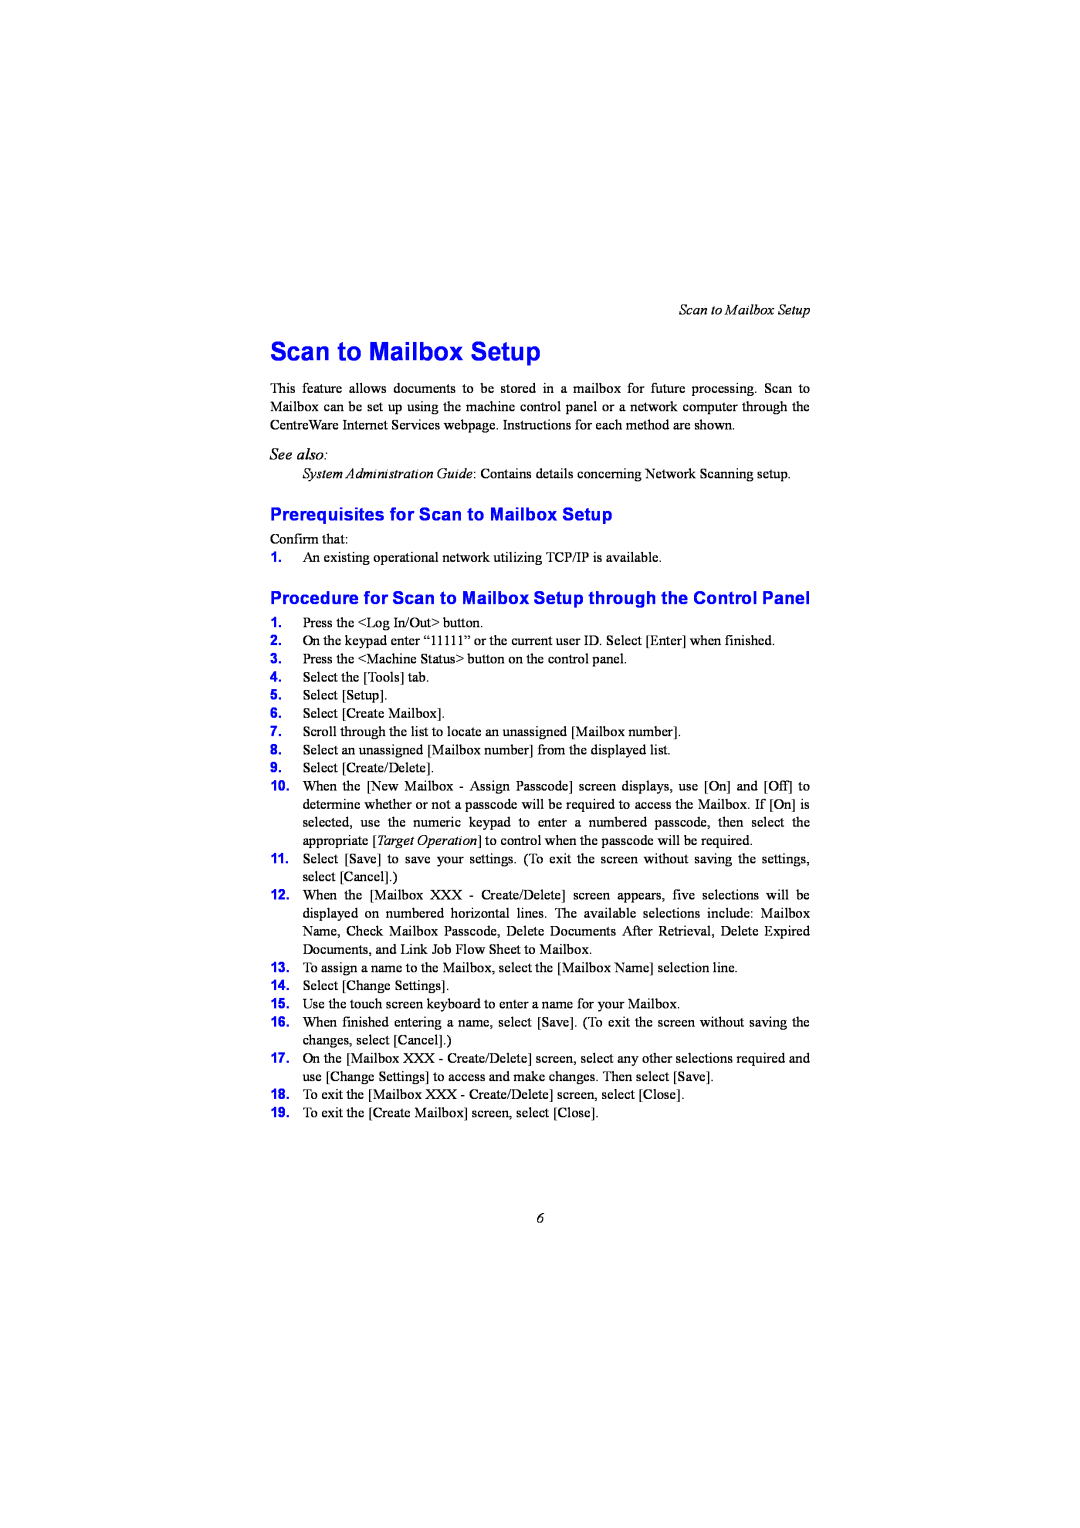 Xerox WC5230 setup guide Prerequisites for Scan to Mailbox Setup, See also 